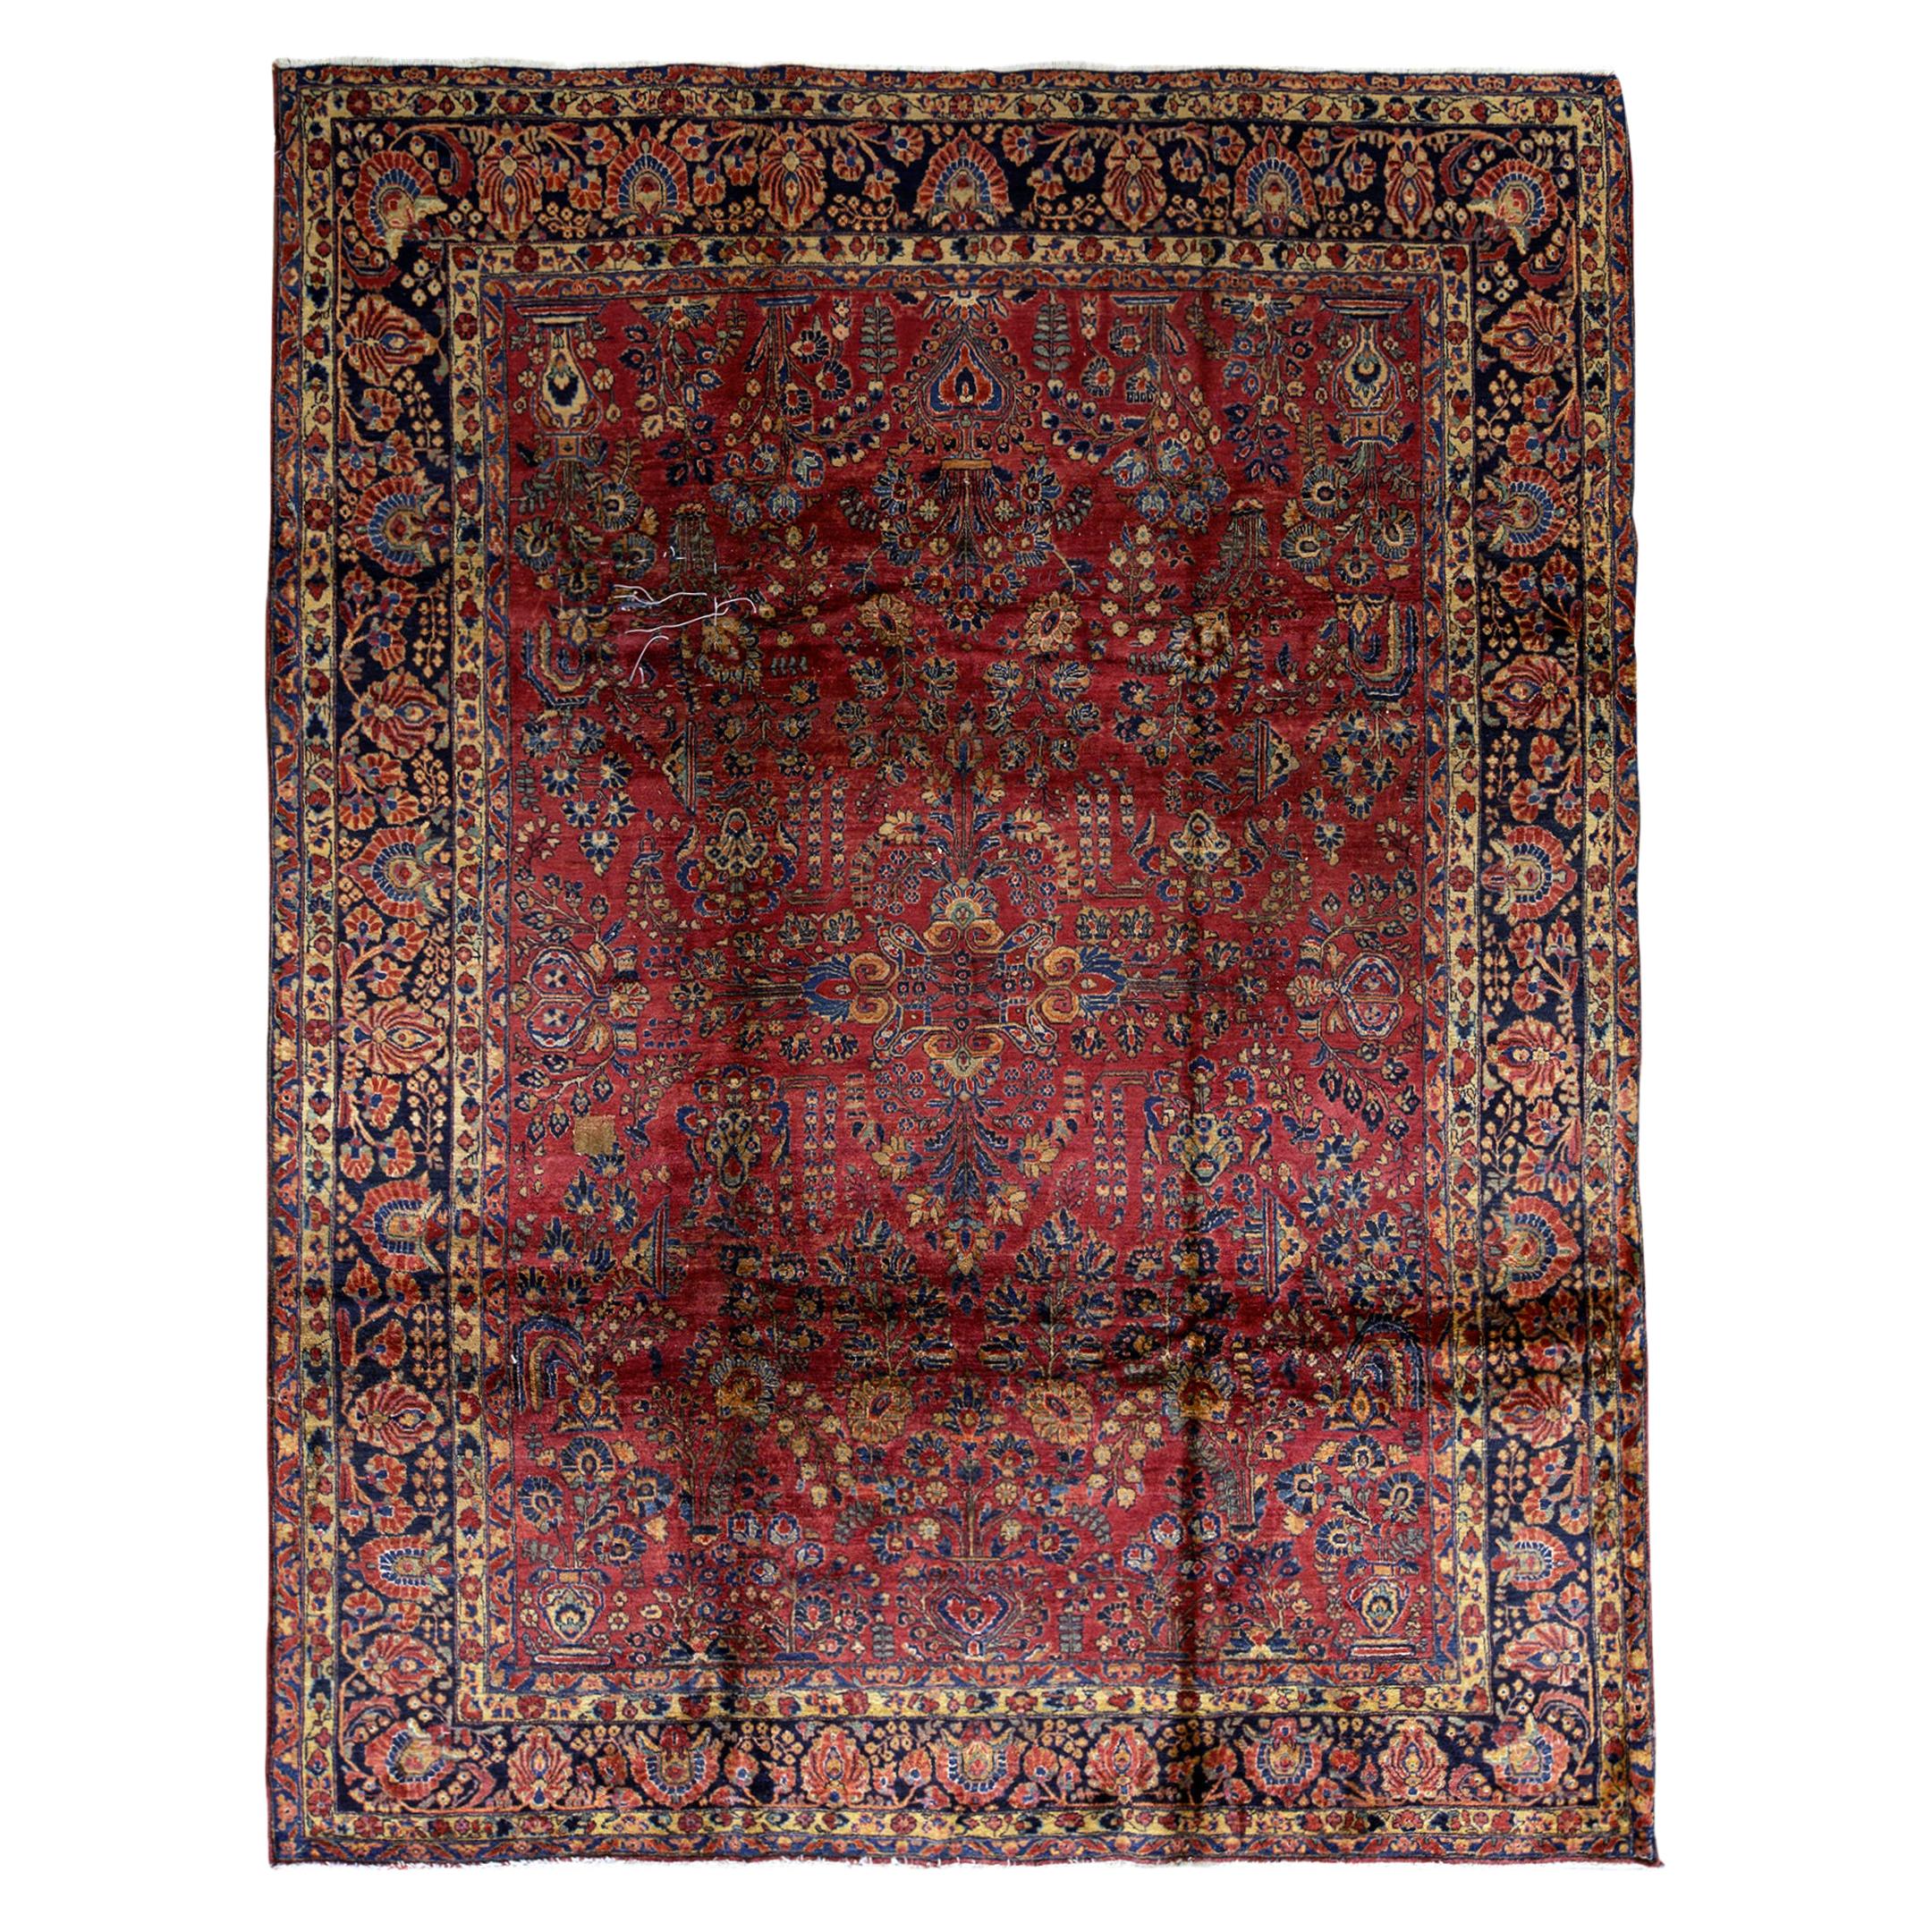  Traditional Handwoven Luxury Wool Semi Antique Persian Red 